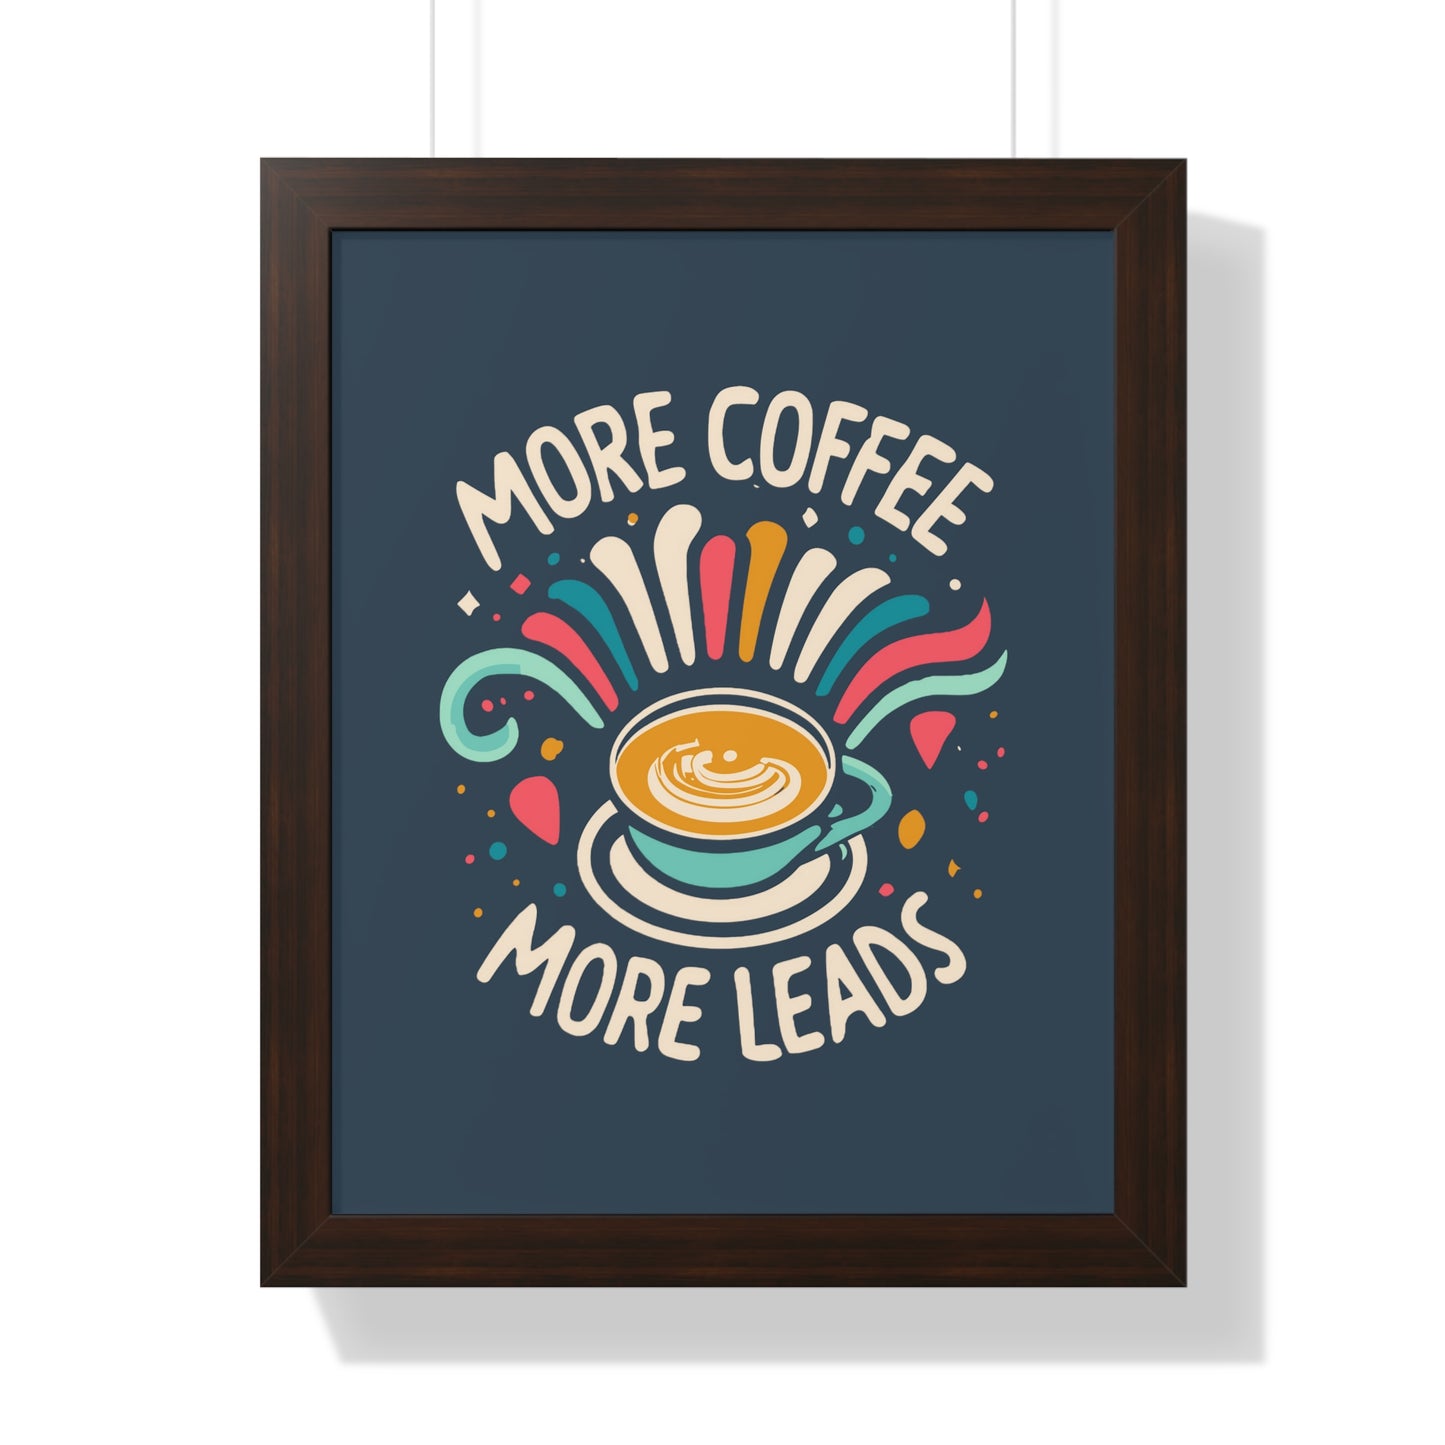 More coffee, more leads